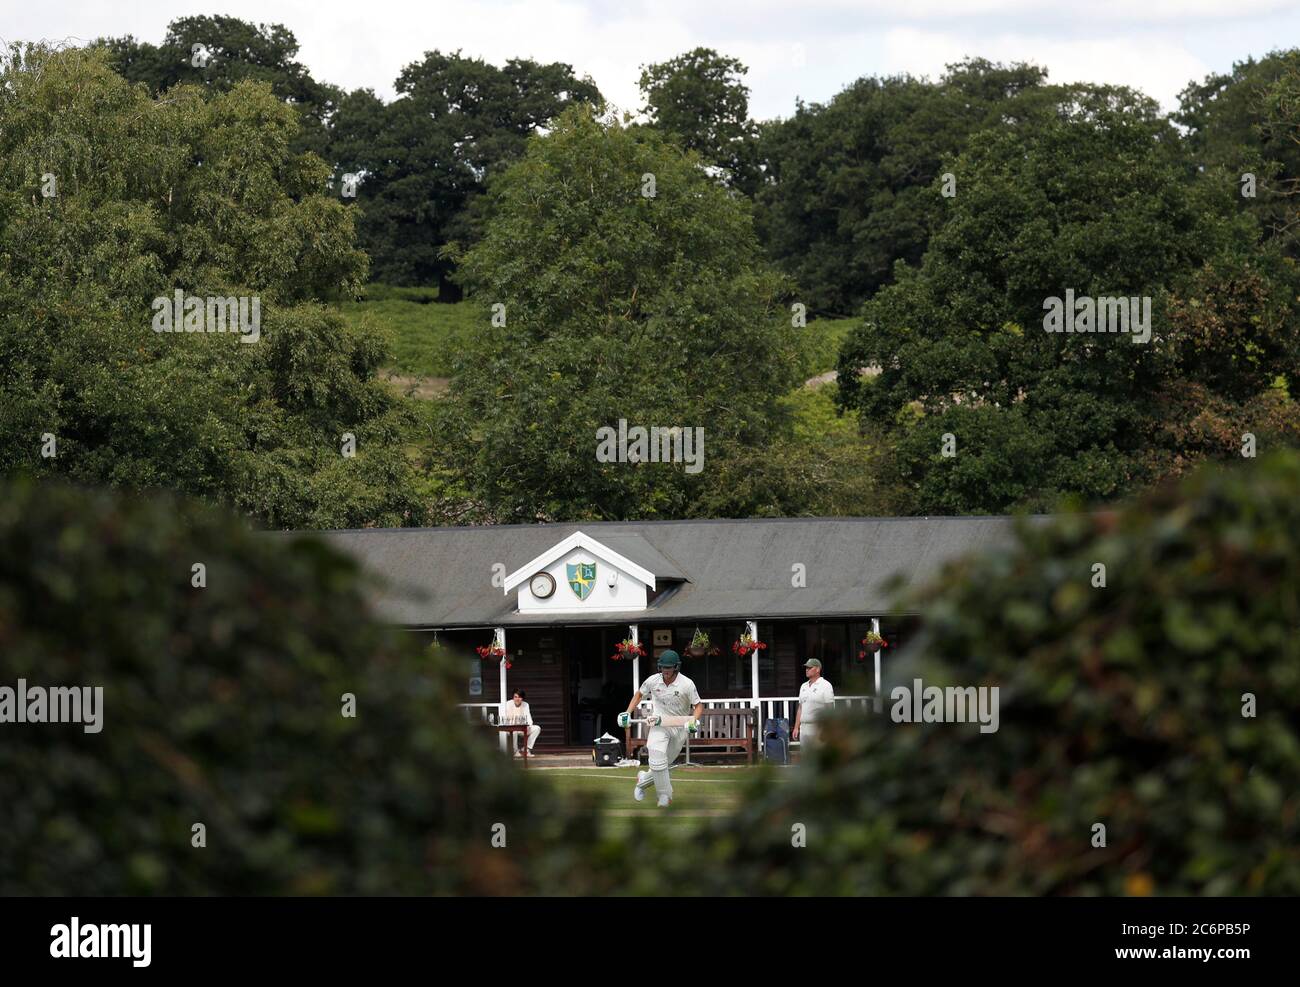 Newtown Linford, Leicestershire, UK. 11th July 2020. Newtown Linford Cricket Club play Oakham after the UK government relaxed coronavirus pandemic lockdown restrictions for several outdoor activities. Credit Darren Staples/Alamy Live News. Stock Photo